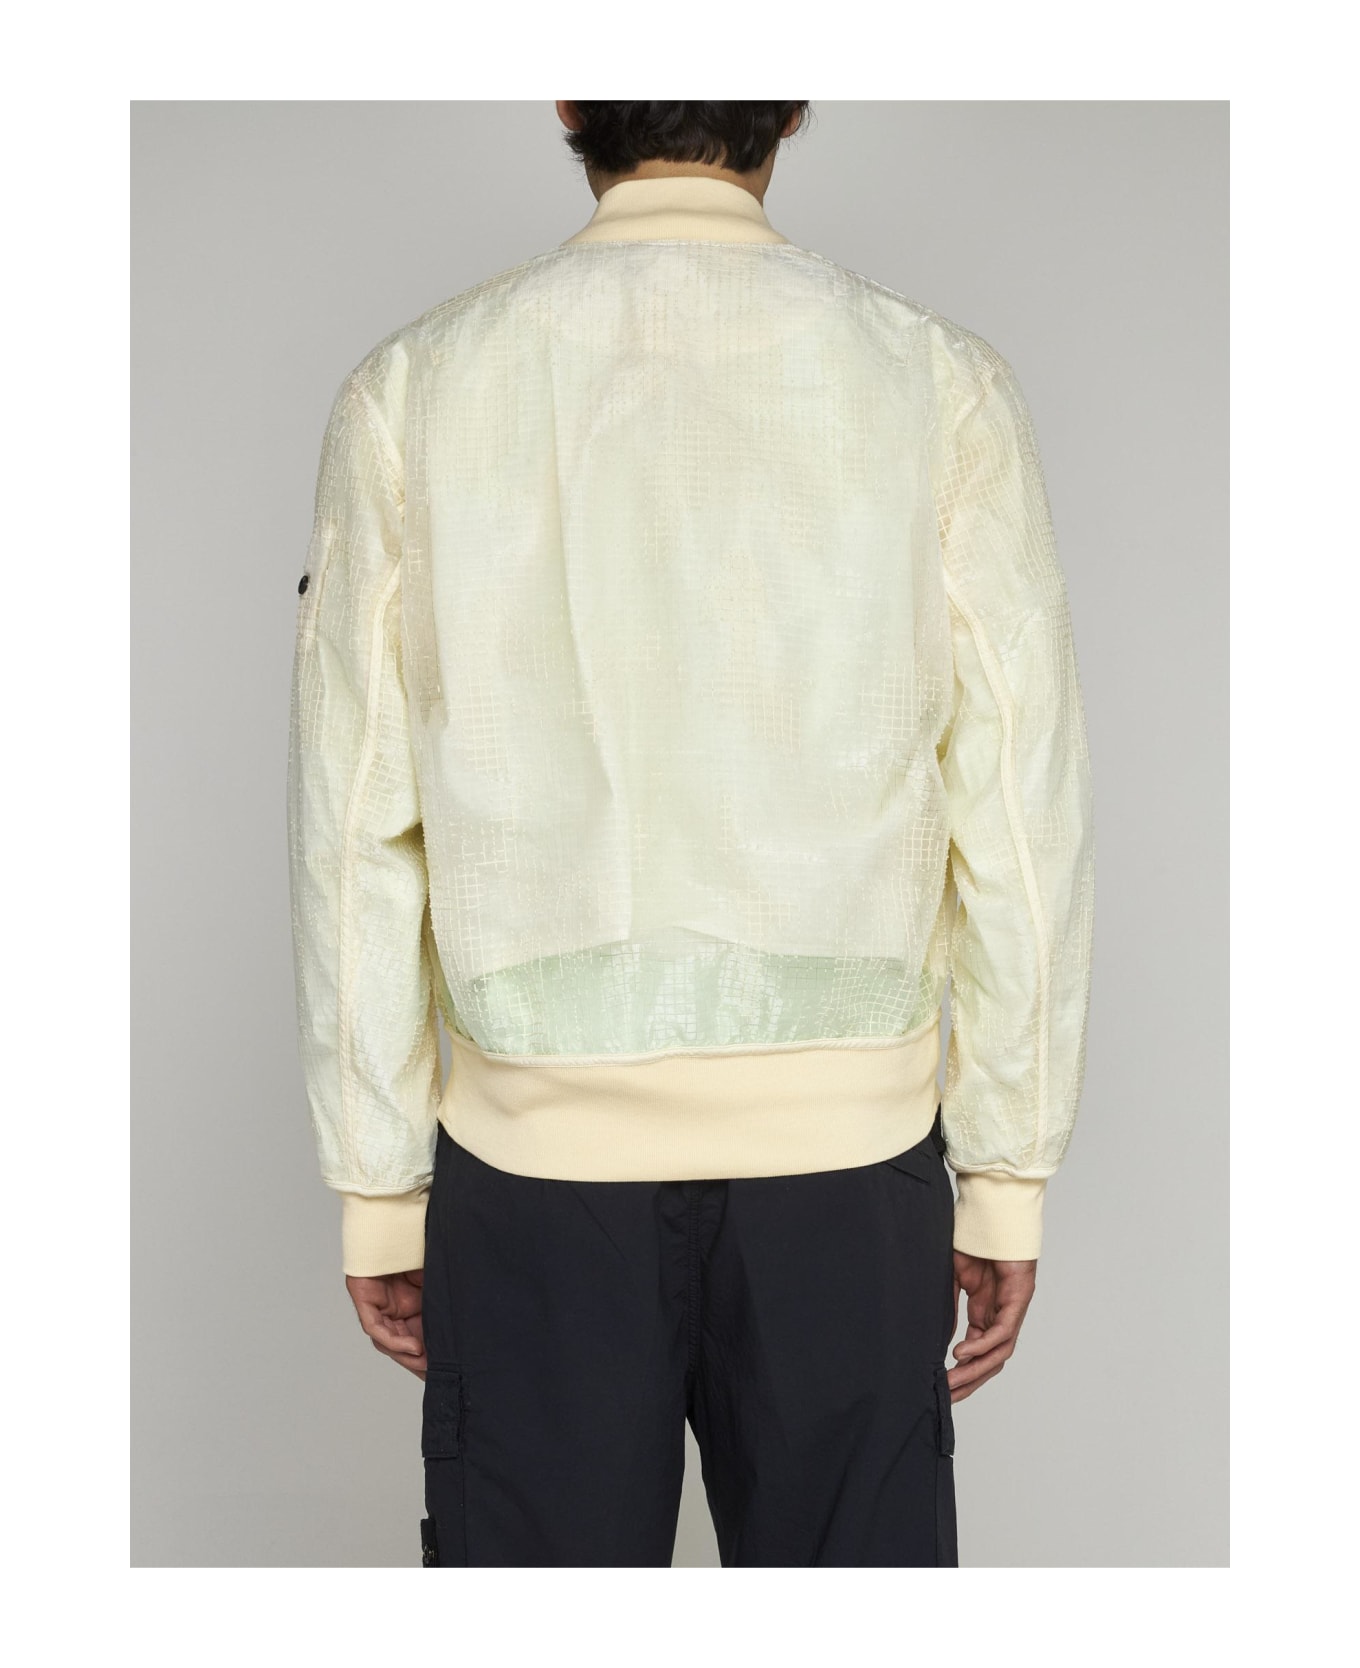 Stone Island Shadow Project Technical Cotton Blend Bomber Jacket - Butter ジャケット